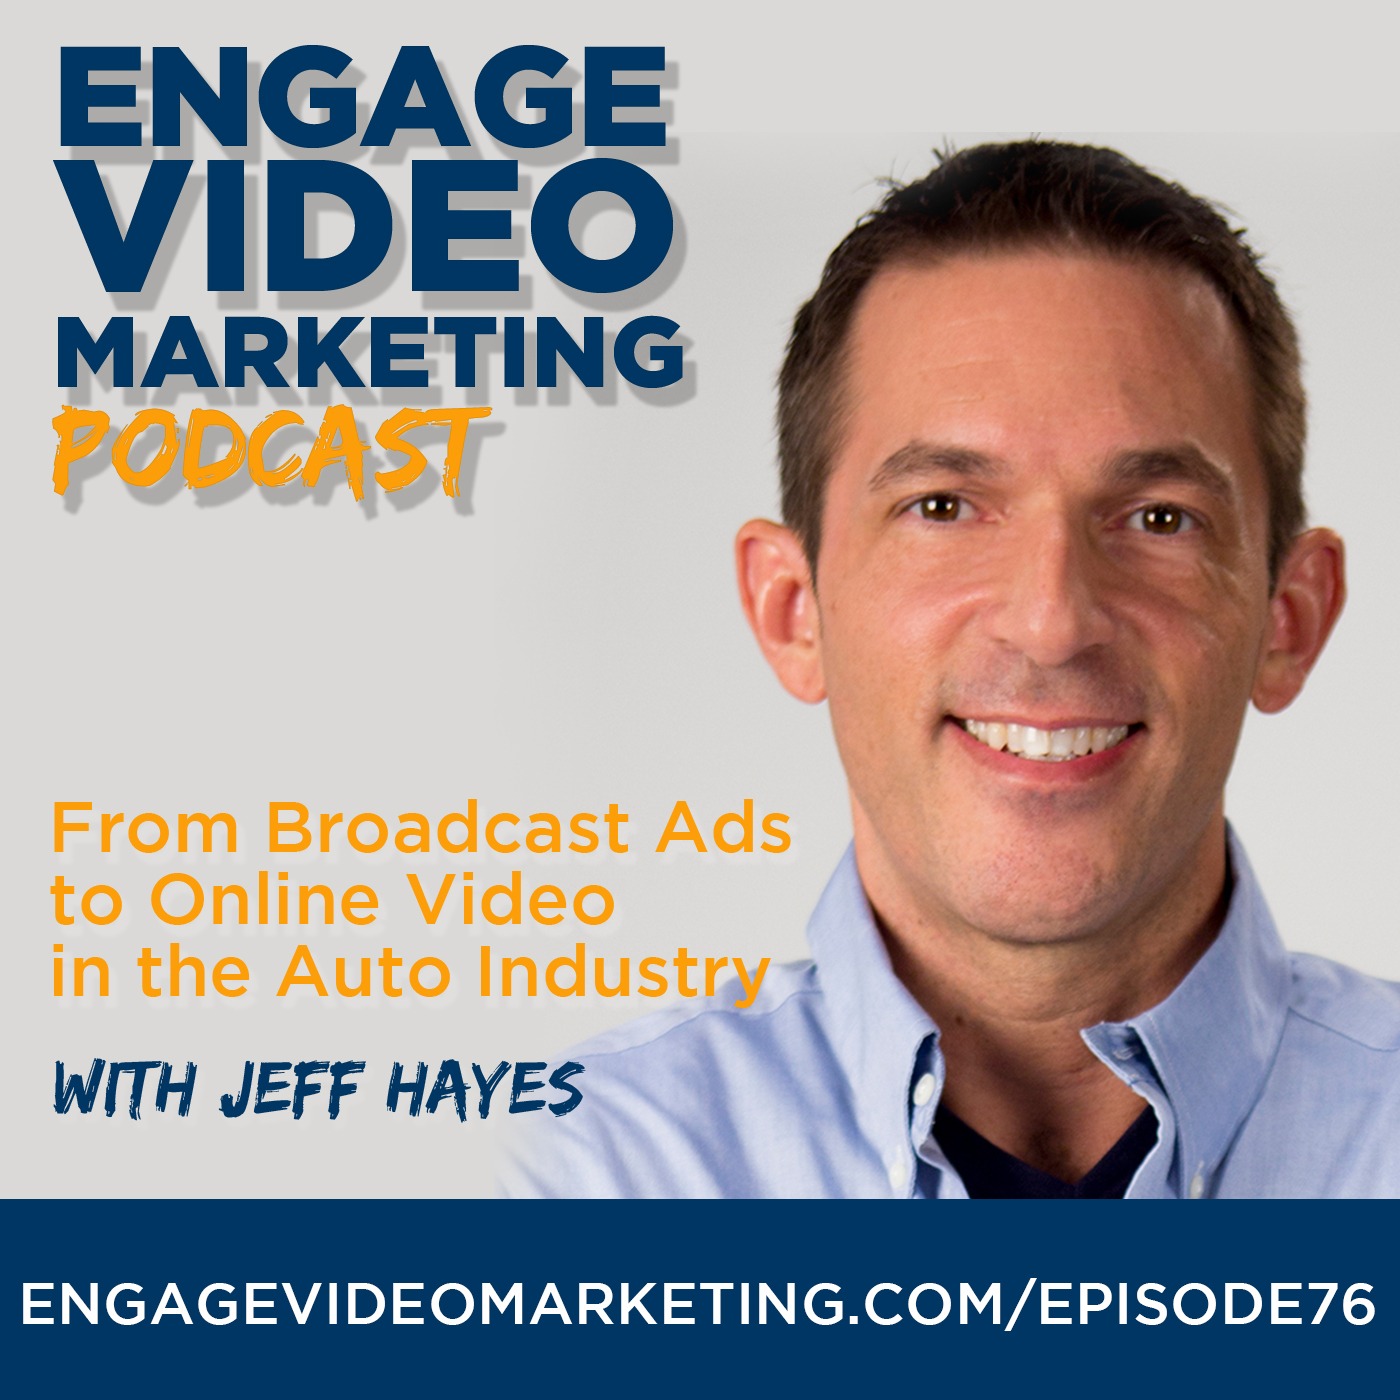 From Broadcast Ads to Online Video in the Auto Industry with Jeff Hayes